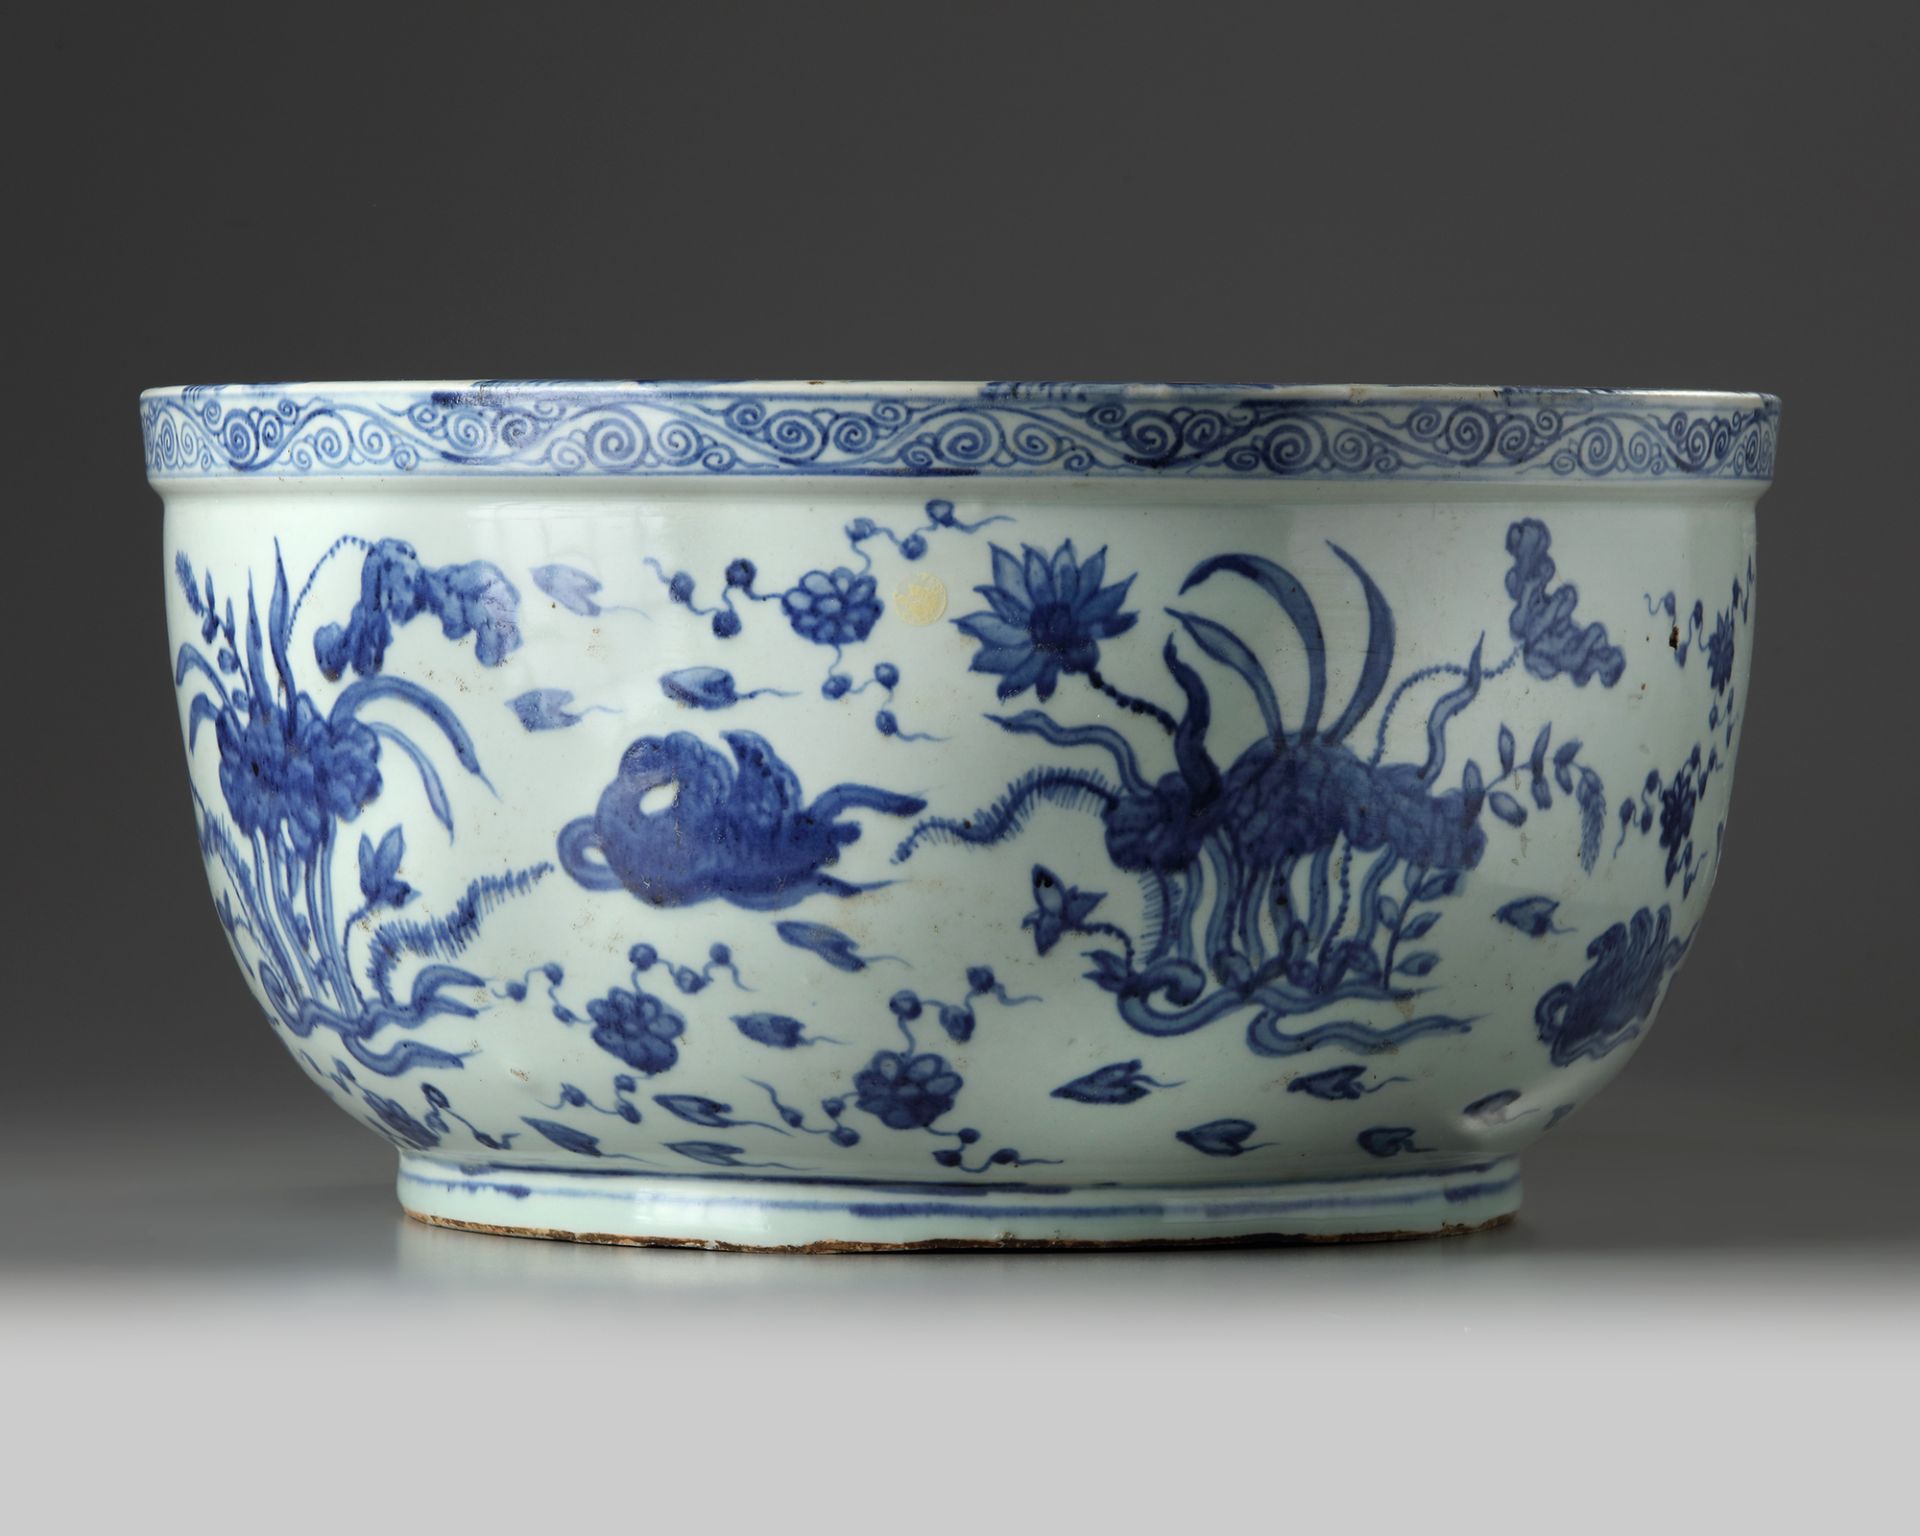 A CHINESE BLUE AND WHITE DUCKS AND LOTUS' BASIN, MING DYNASTY (1368-1644)